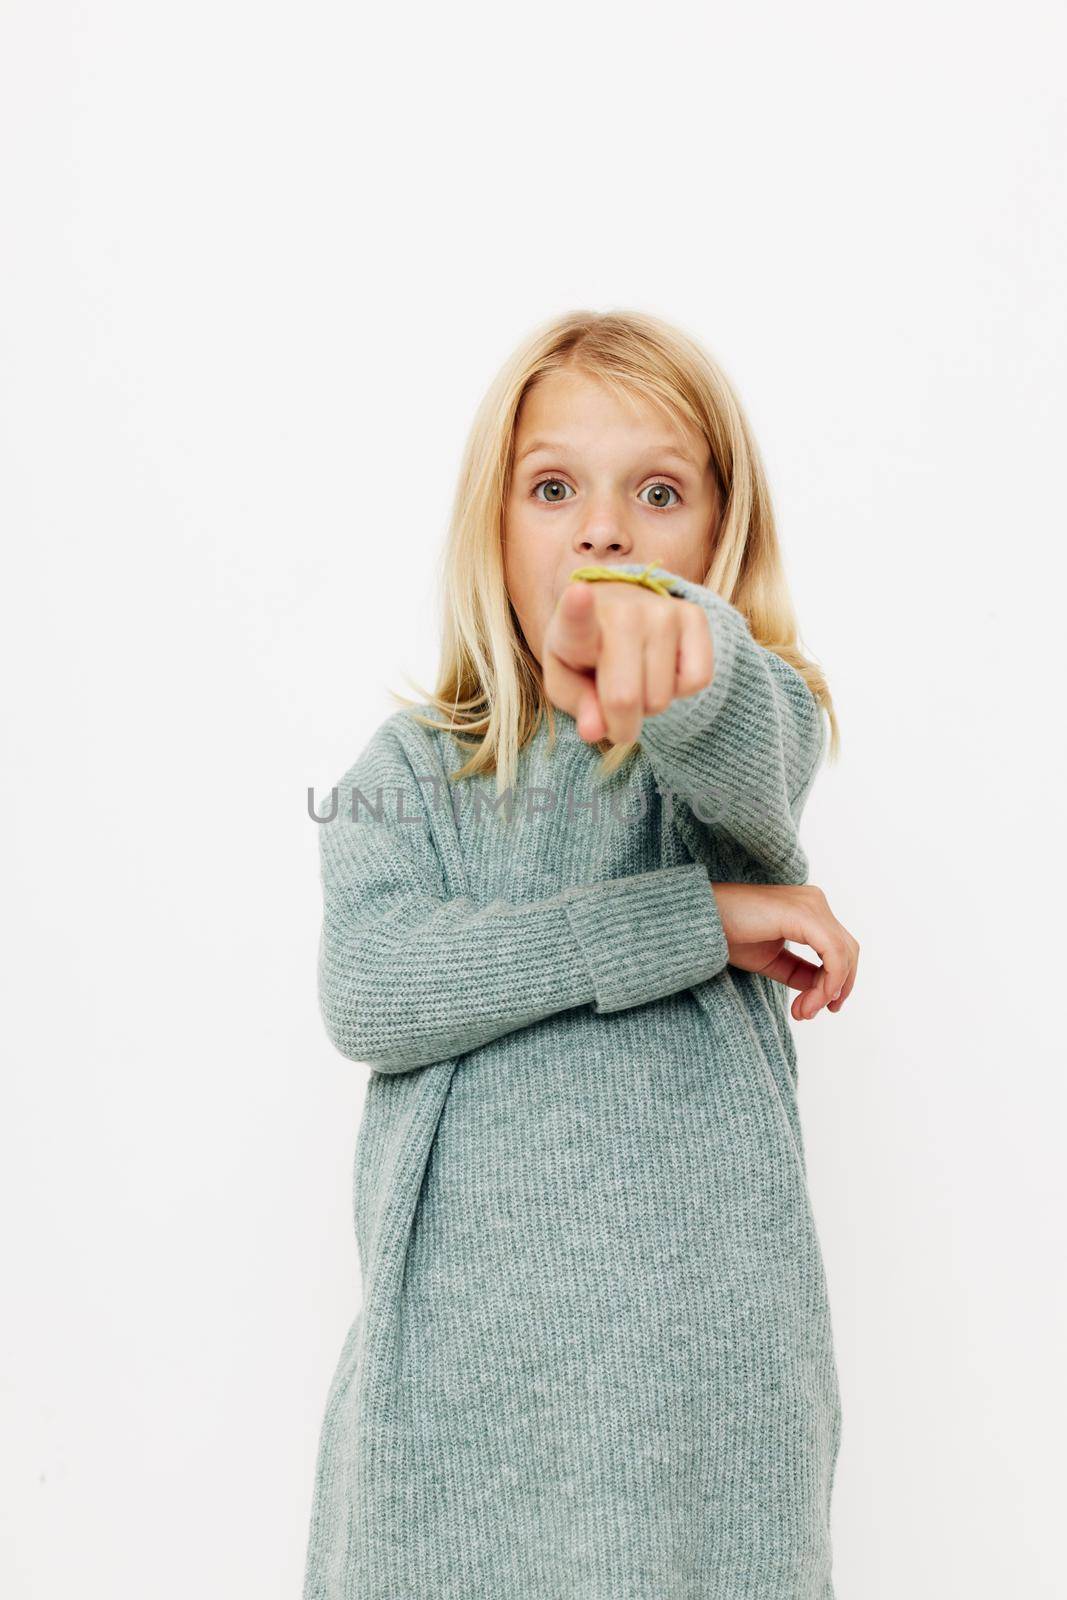 happy cute girl in a sweater, grimaces kids lifestyle concept. High quality photo